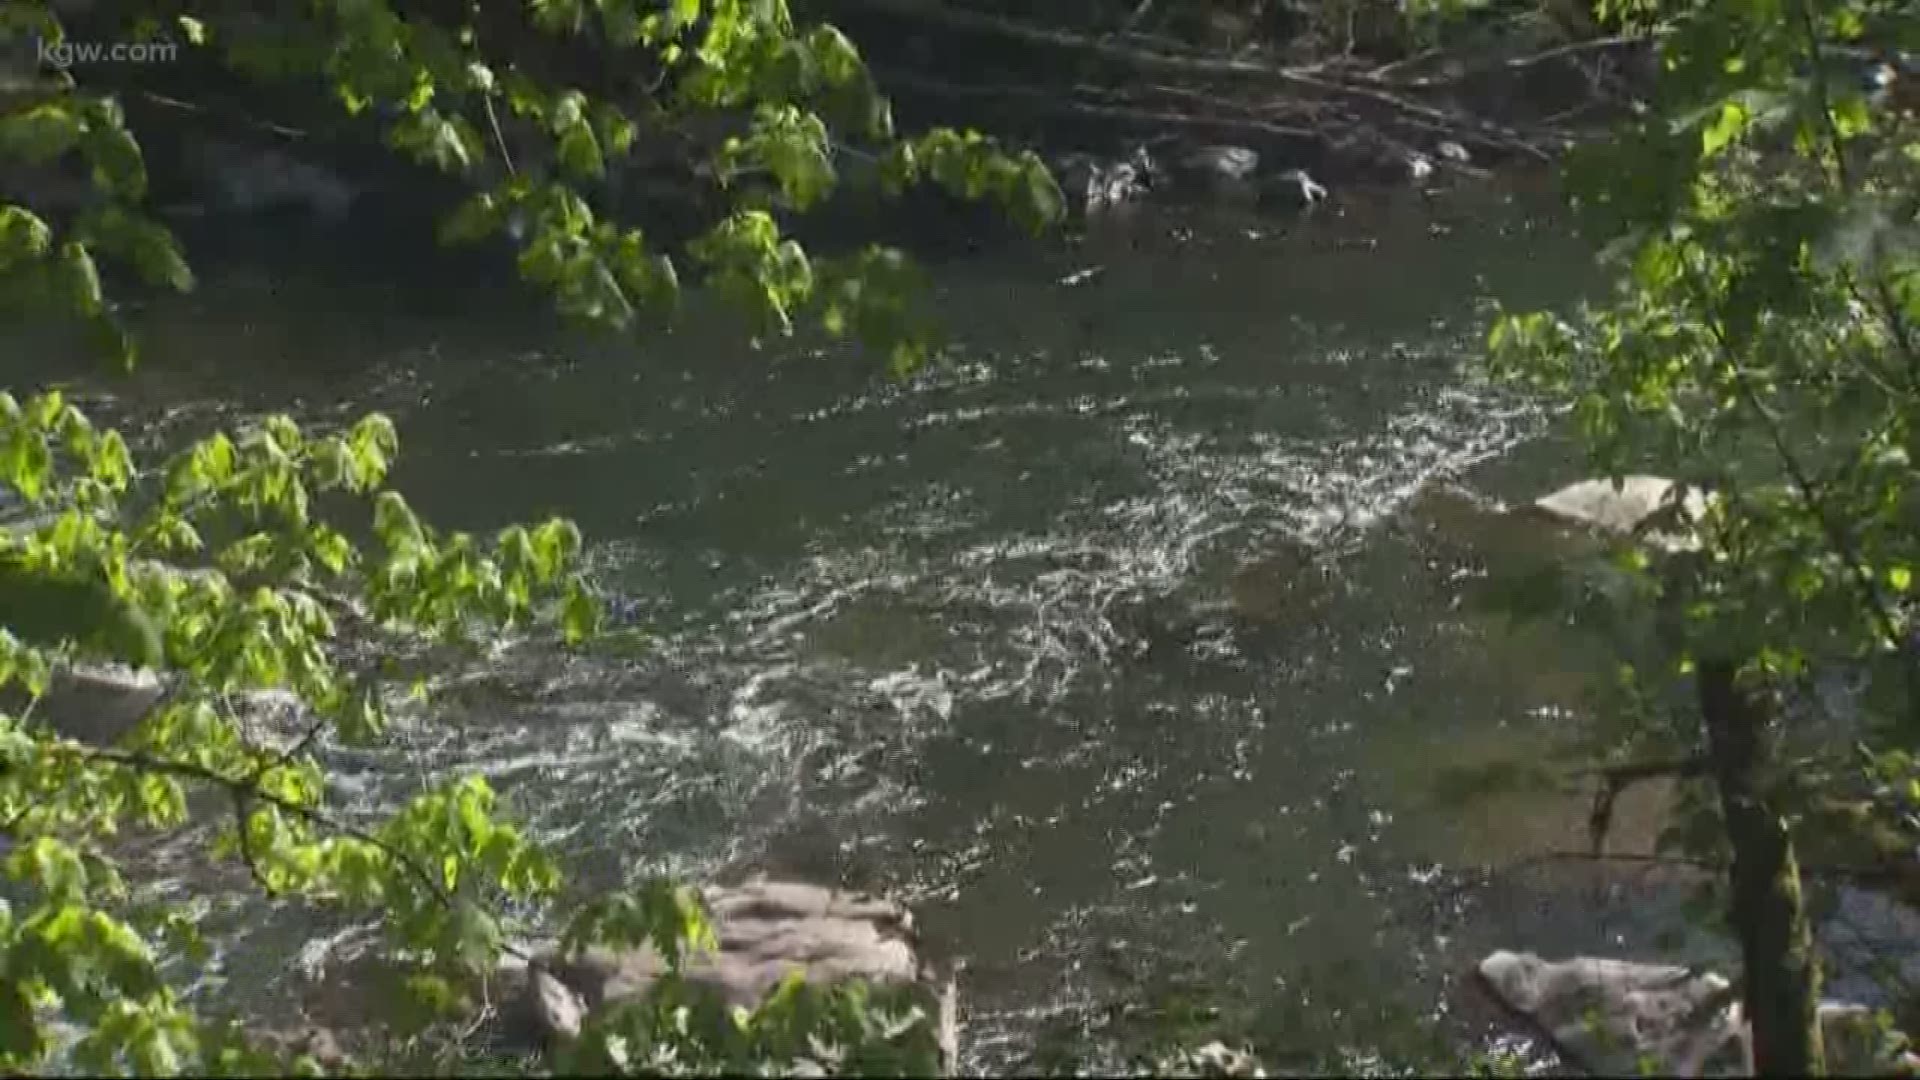 A man is missing and a woman is recovering after they were thrown from their innertubes while floating down the Washougal River Saturday, the Clark County Sheriff’s Office said.